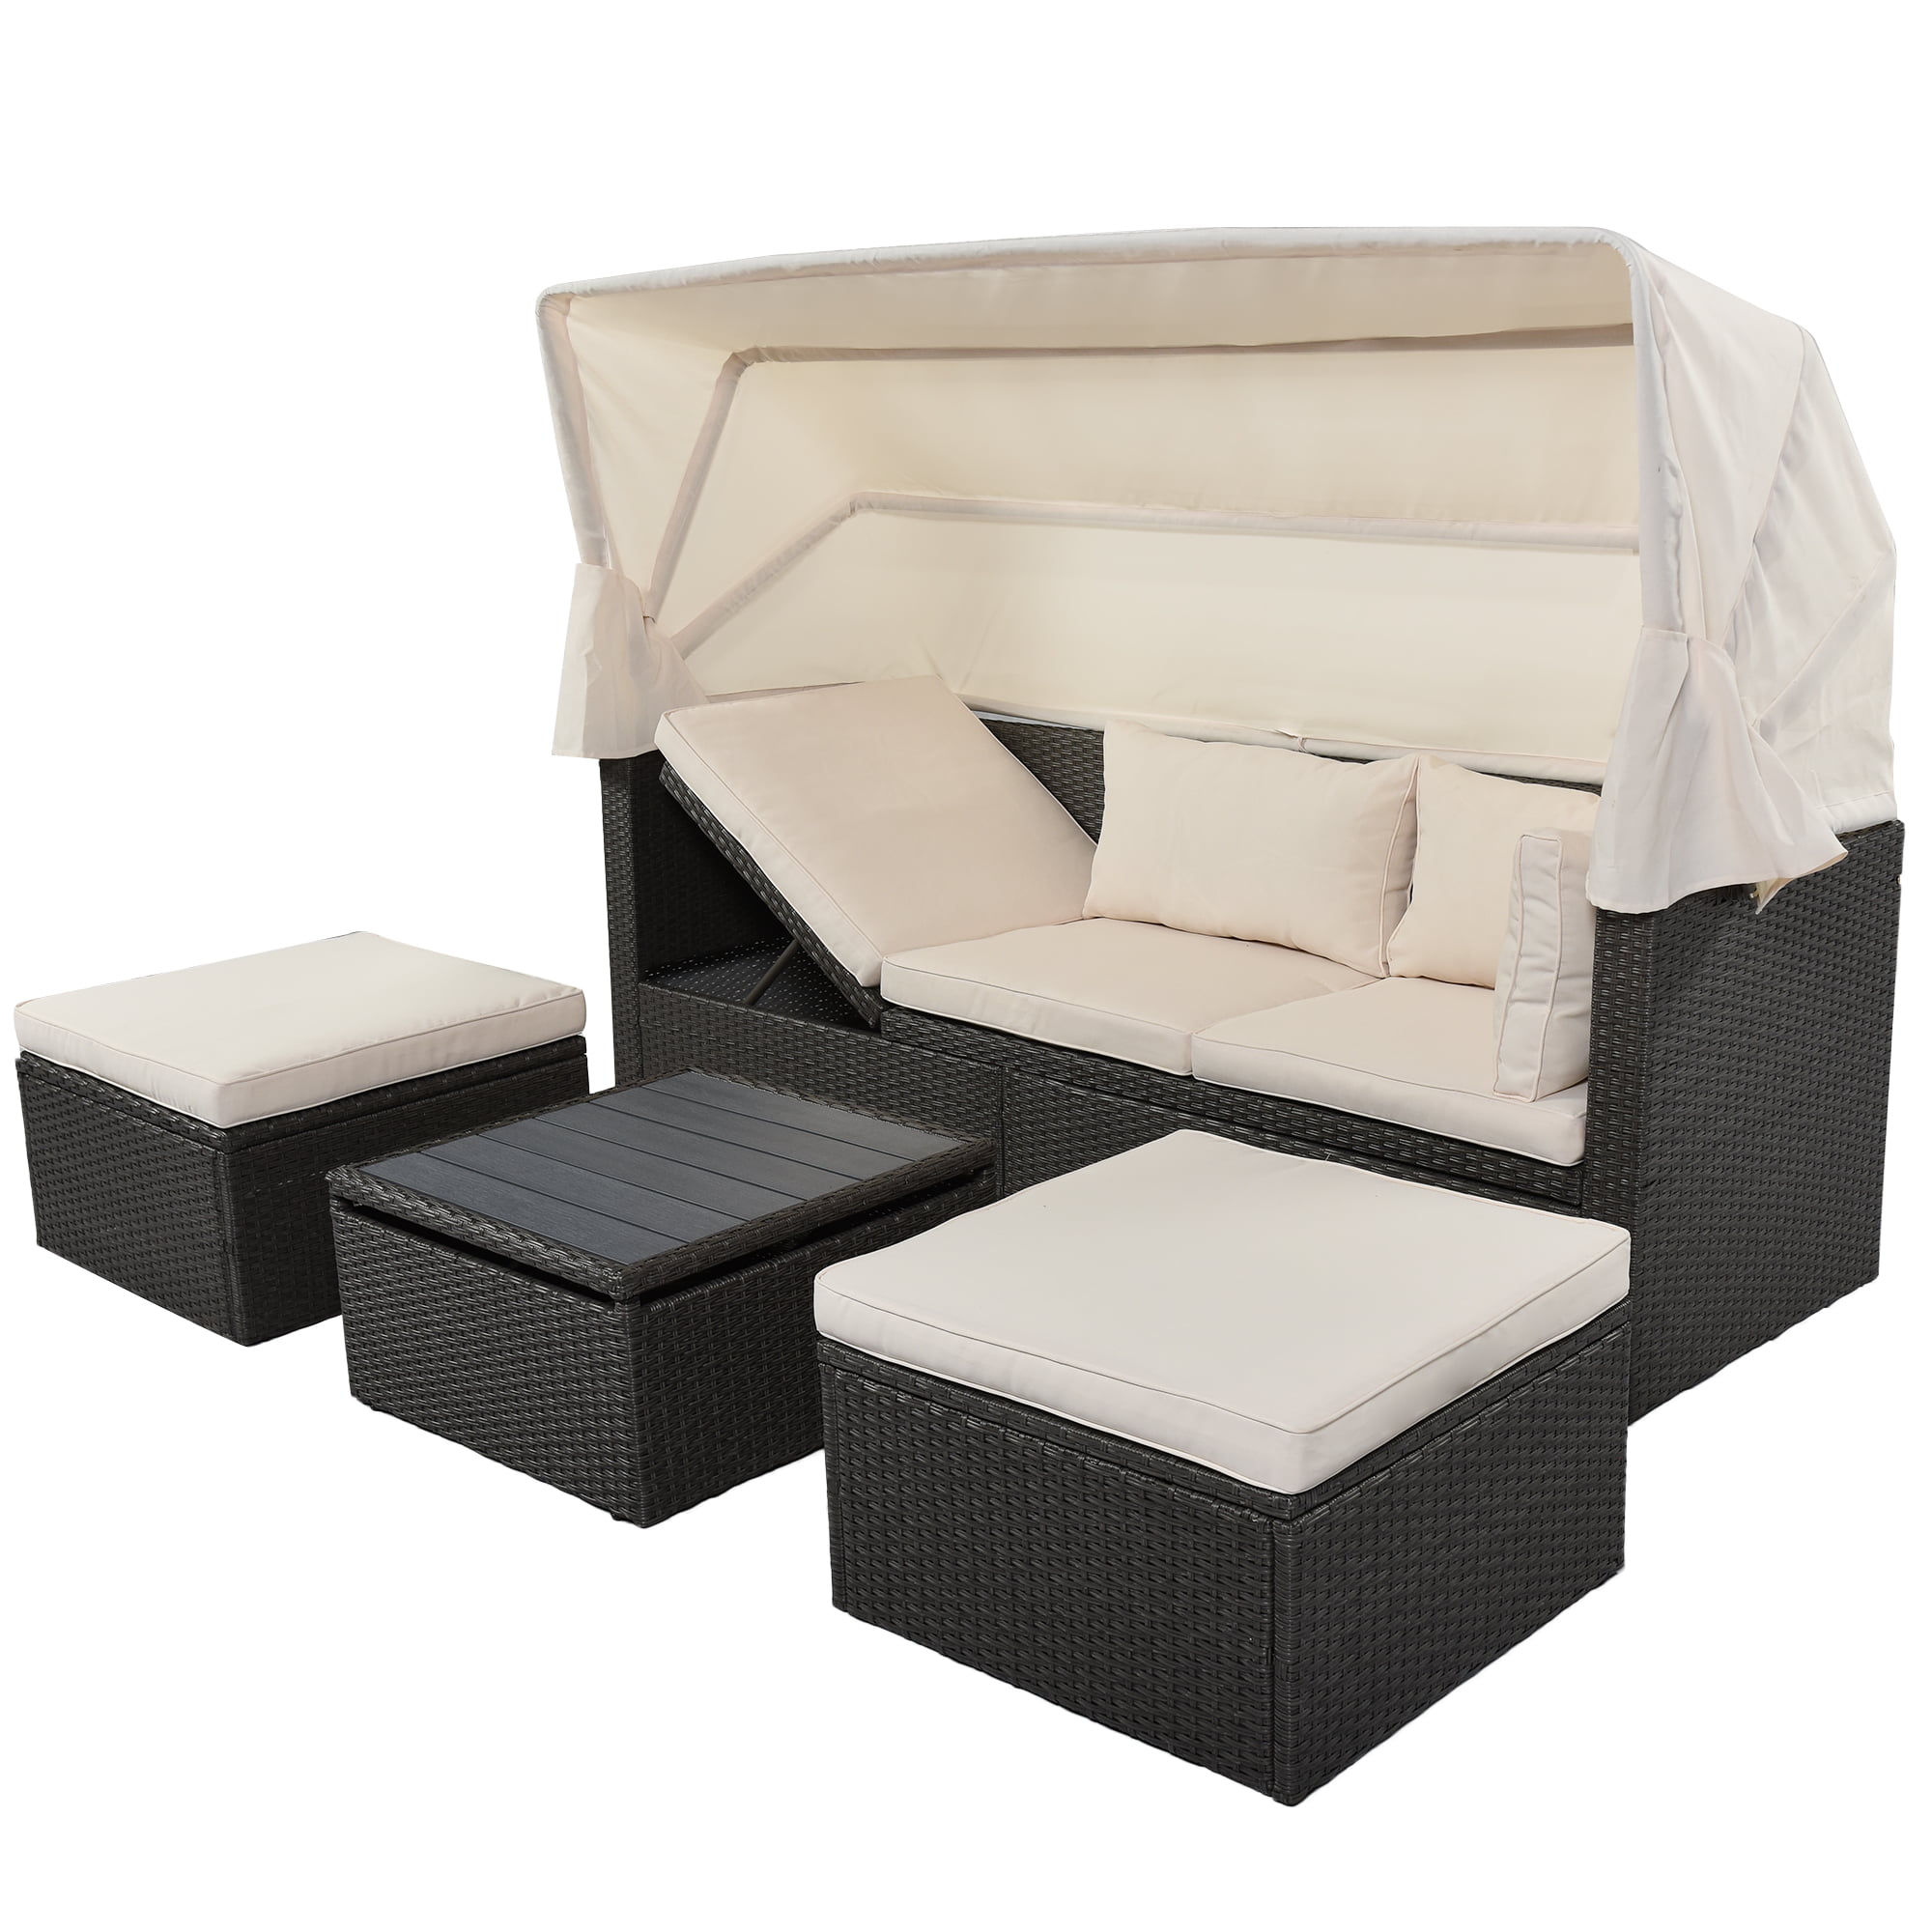 Outdoor Patio Rectangle Daybed with Retractable Canopy - WY000319AAK